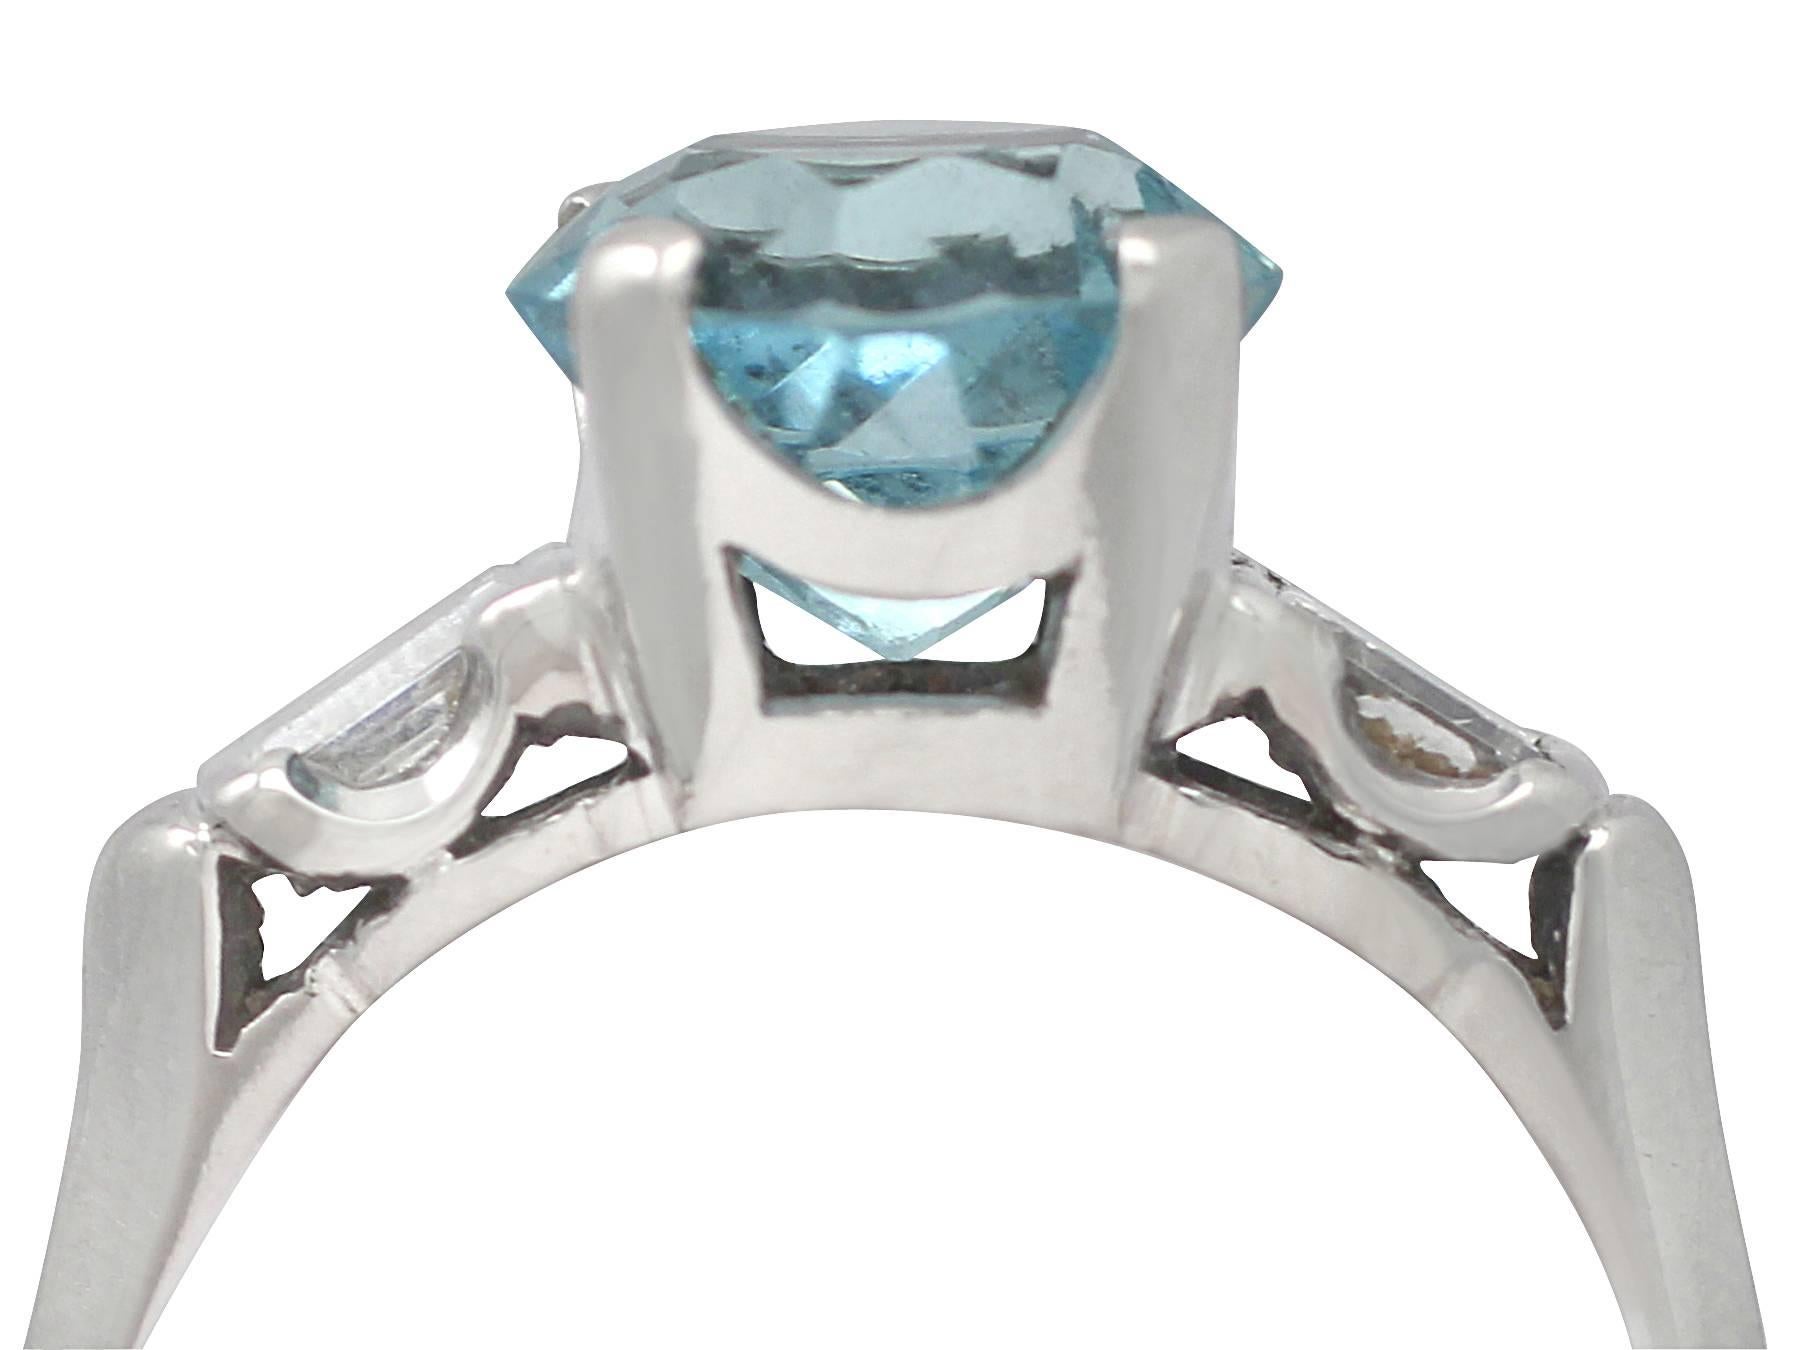 A stunning, fine and impressive vintage 2.45 carat aquamarine and 0.40 carat diamond, 18 karat white gold and platinum set dress ring; part of our diverse gemstone jewelry collection

This stunning, fine and impressive vintage aquamarine ring has